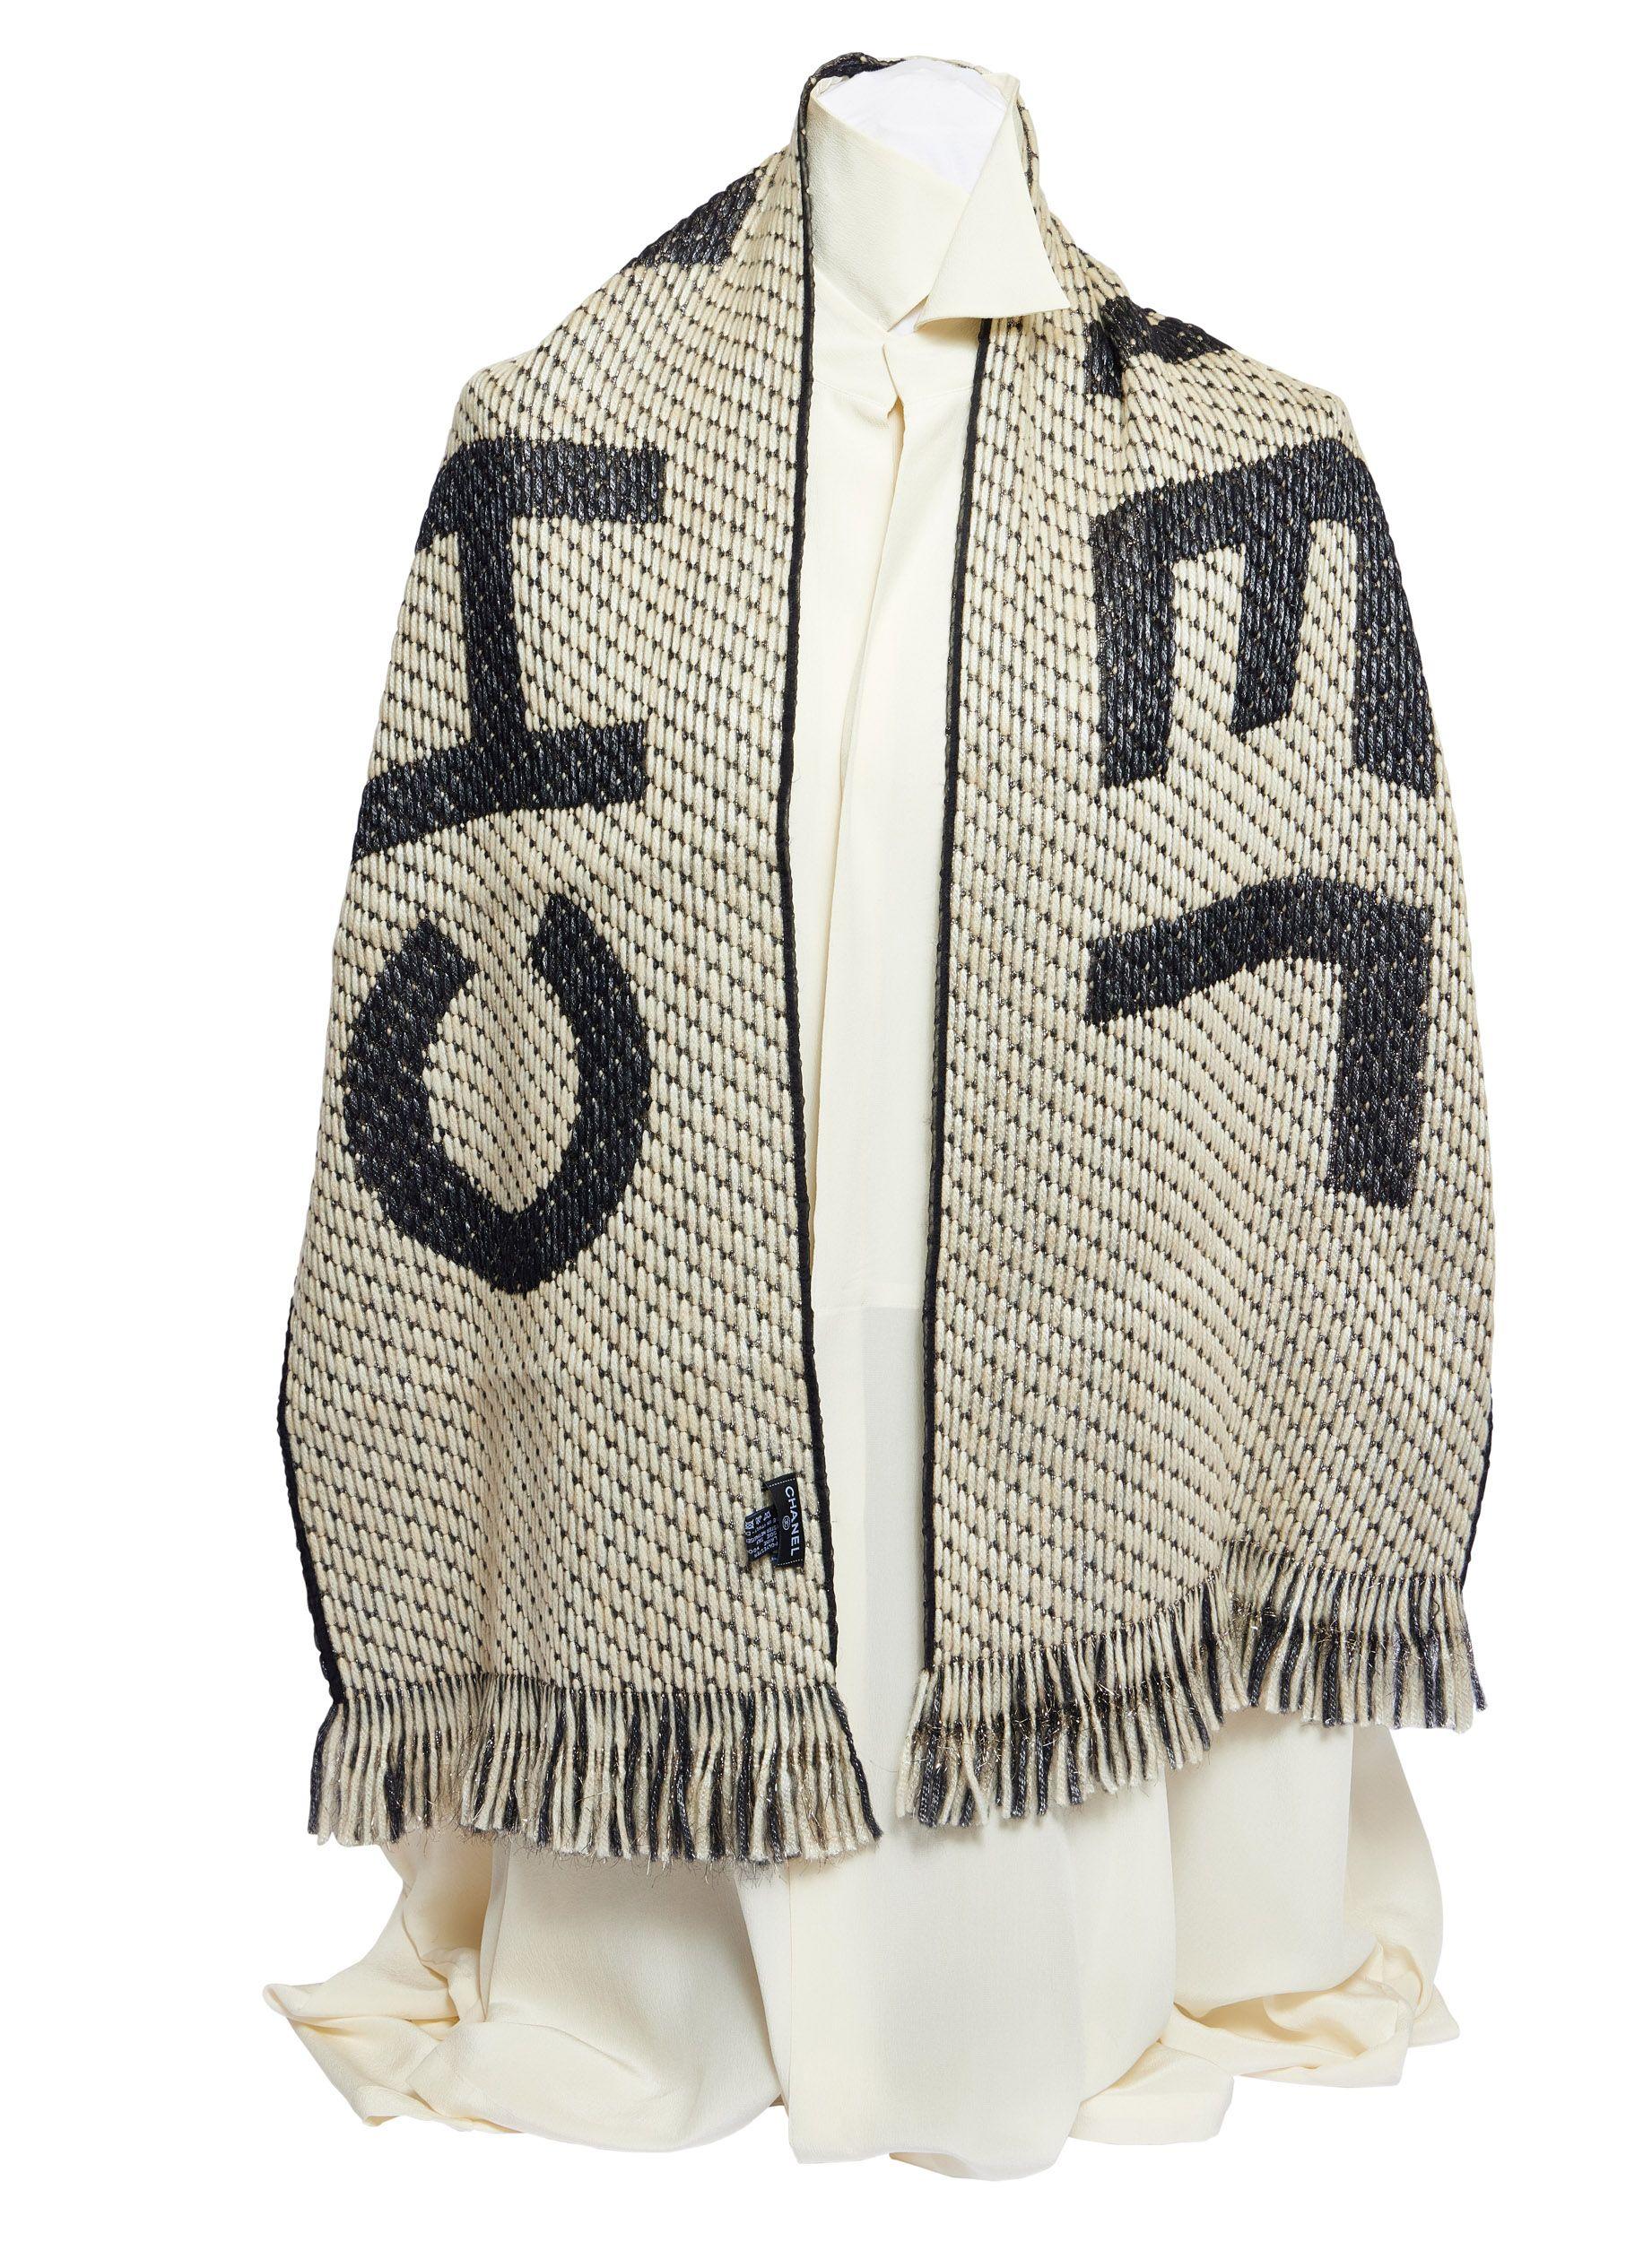 Brand new Chanel scarf in black and white. The material lurex gives the piece a metallic look so you can either wear it at daytime as well as in the evening. Chanel is written over the whole scarf and you can wear it both sides. Either black or